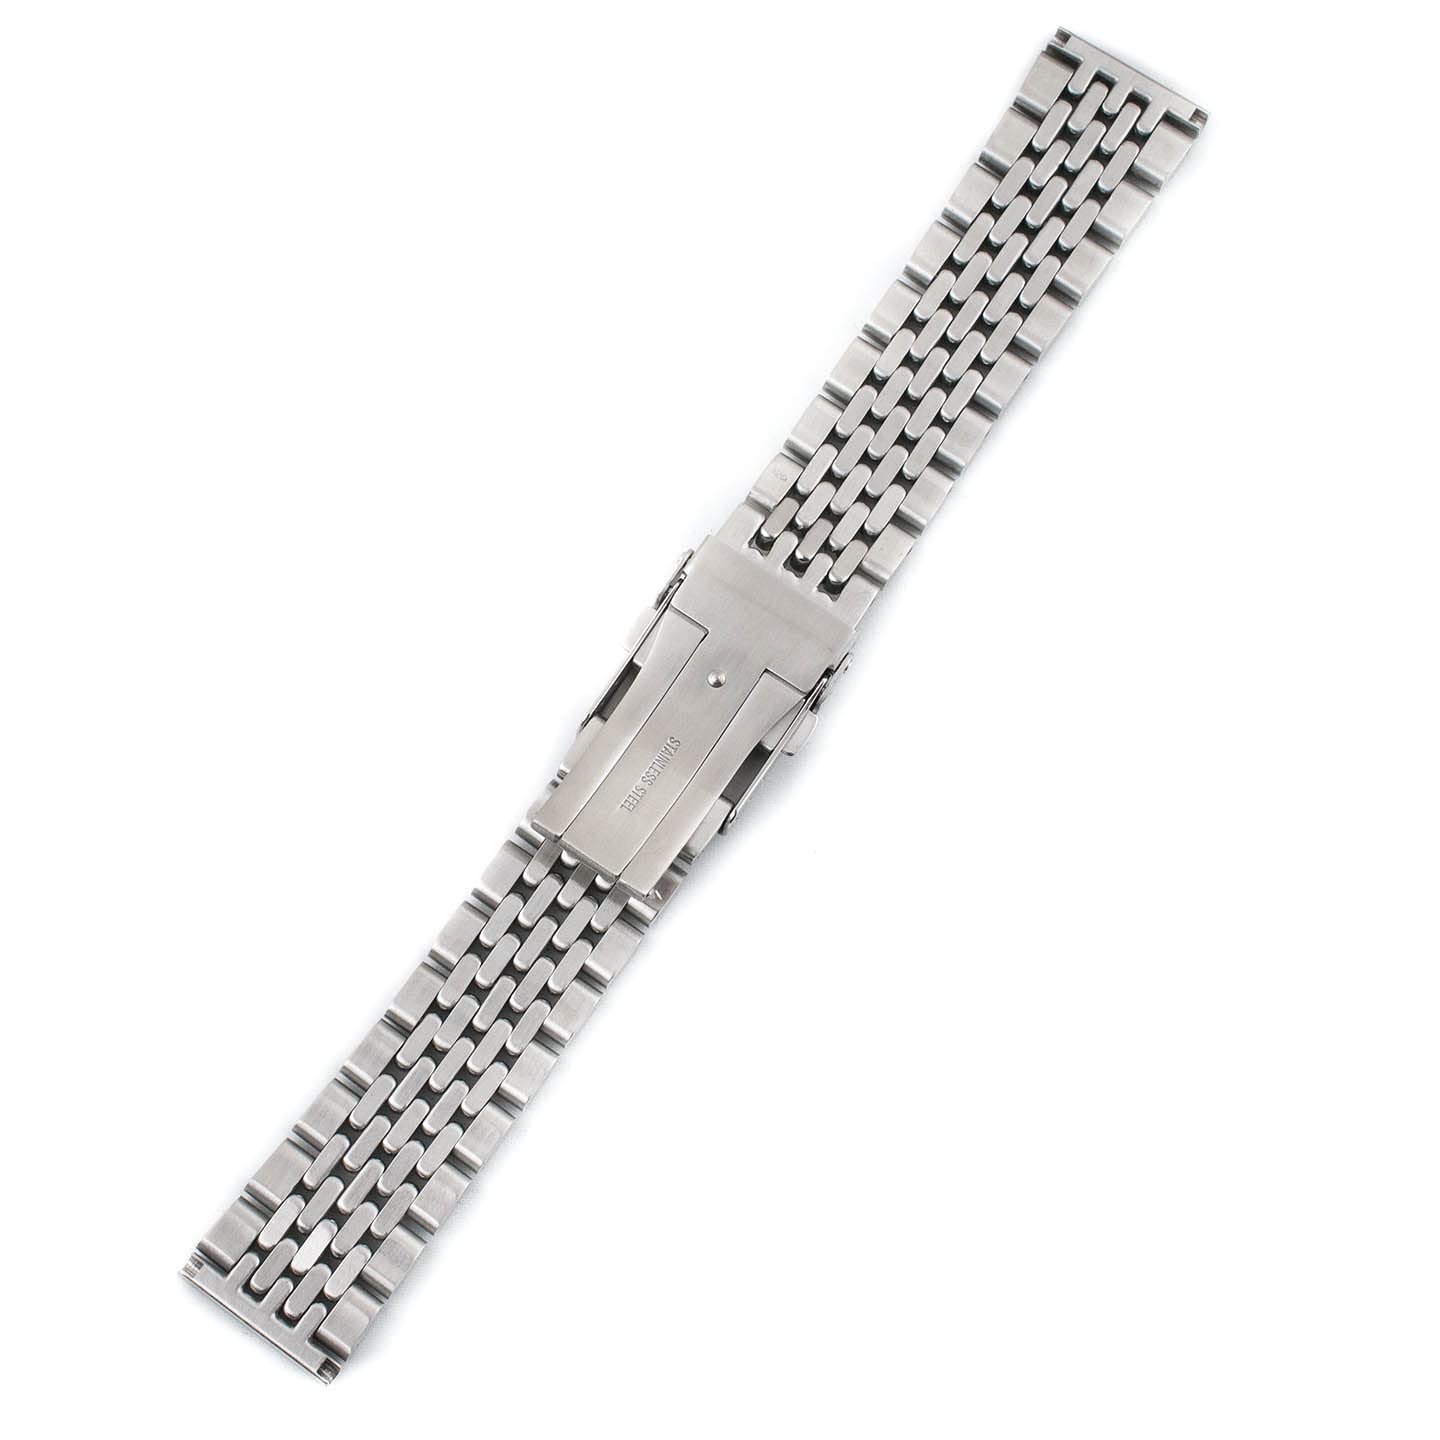 StrapHabit Beads of Rice Watch Bracelet Band Strap - Stainless Steel Vintage BOR 18mm 19mm 20mm 21mm 22mm 24mm